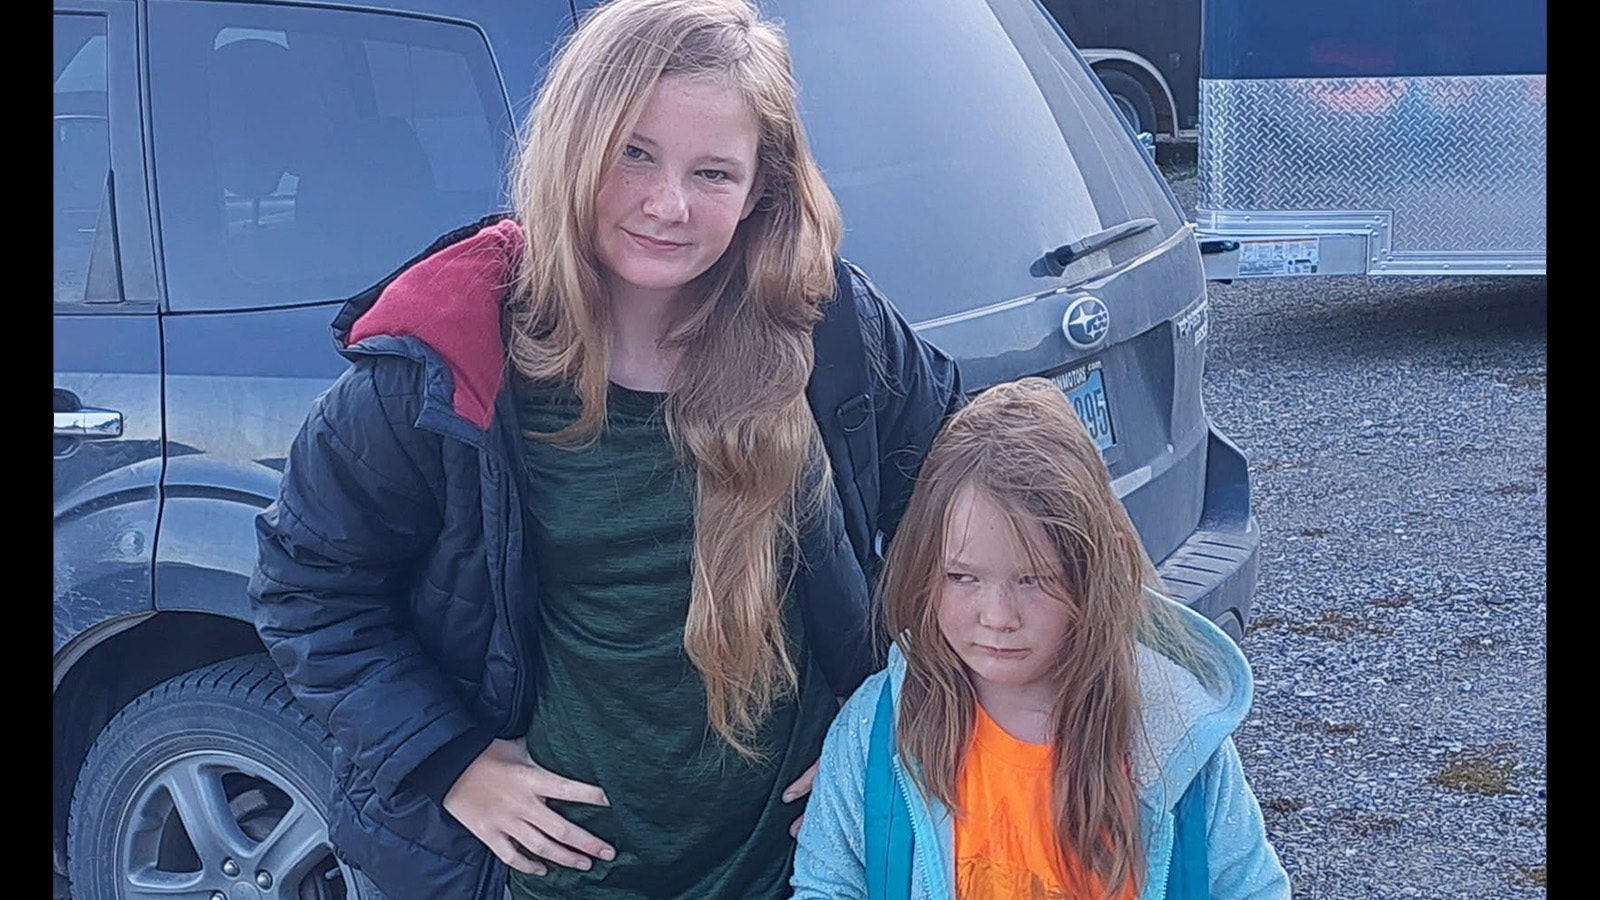 A pair of Wyoming girls missing for 74 days after their mother took them from home in February have been found safe and reunited with their father. This photo is from the poster asking people to look out for the girls.